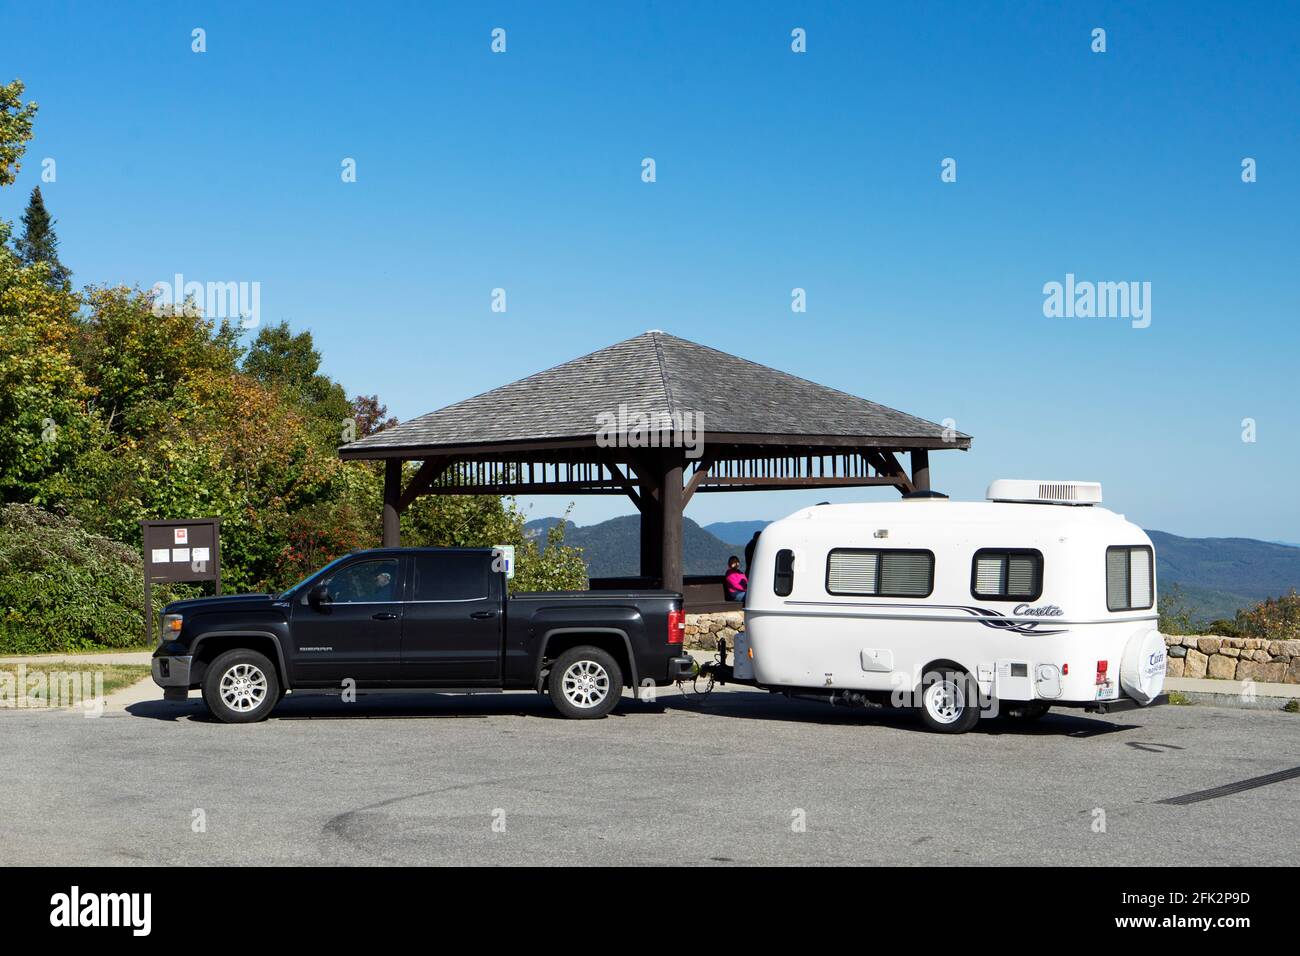 Sierra pickup truck with Casita camper in tow parked at an outlook on Kancamagus Highway, New Hampshire, USA. Stock Photo